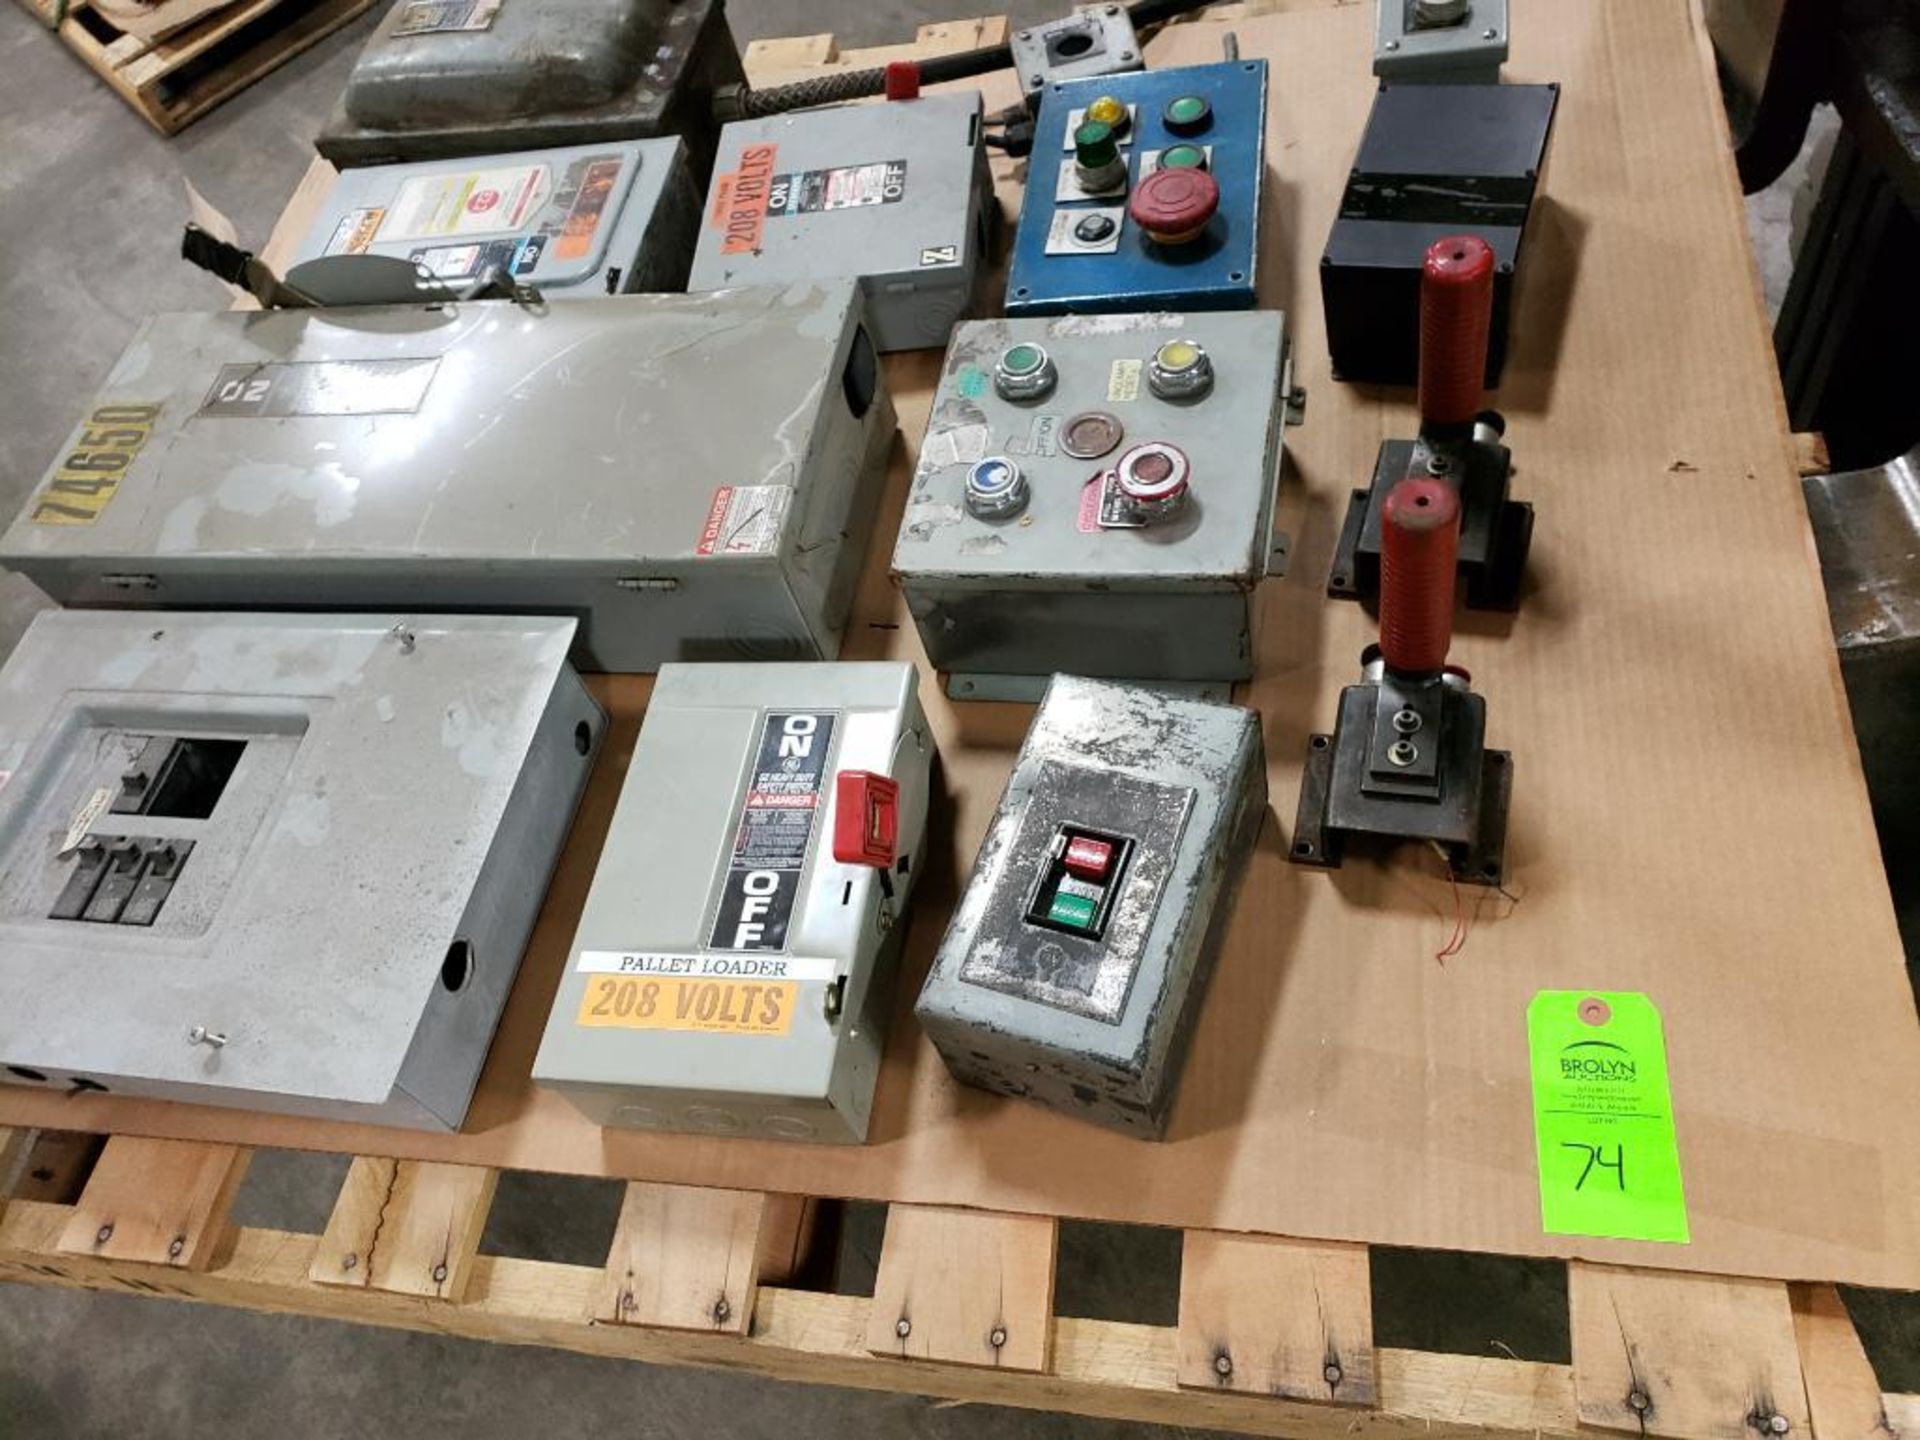 Pallet of assorted safety disconnects, breaker boxes, etc.